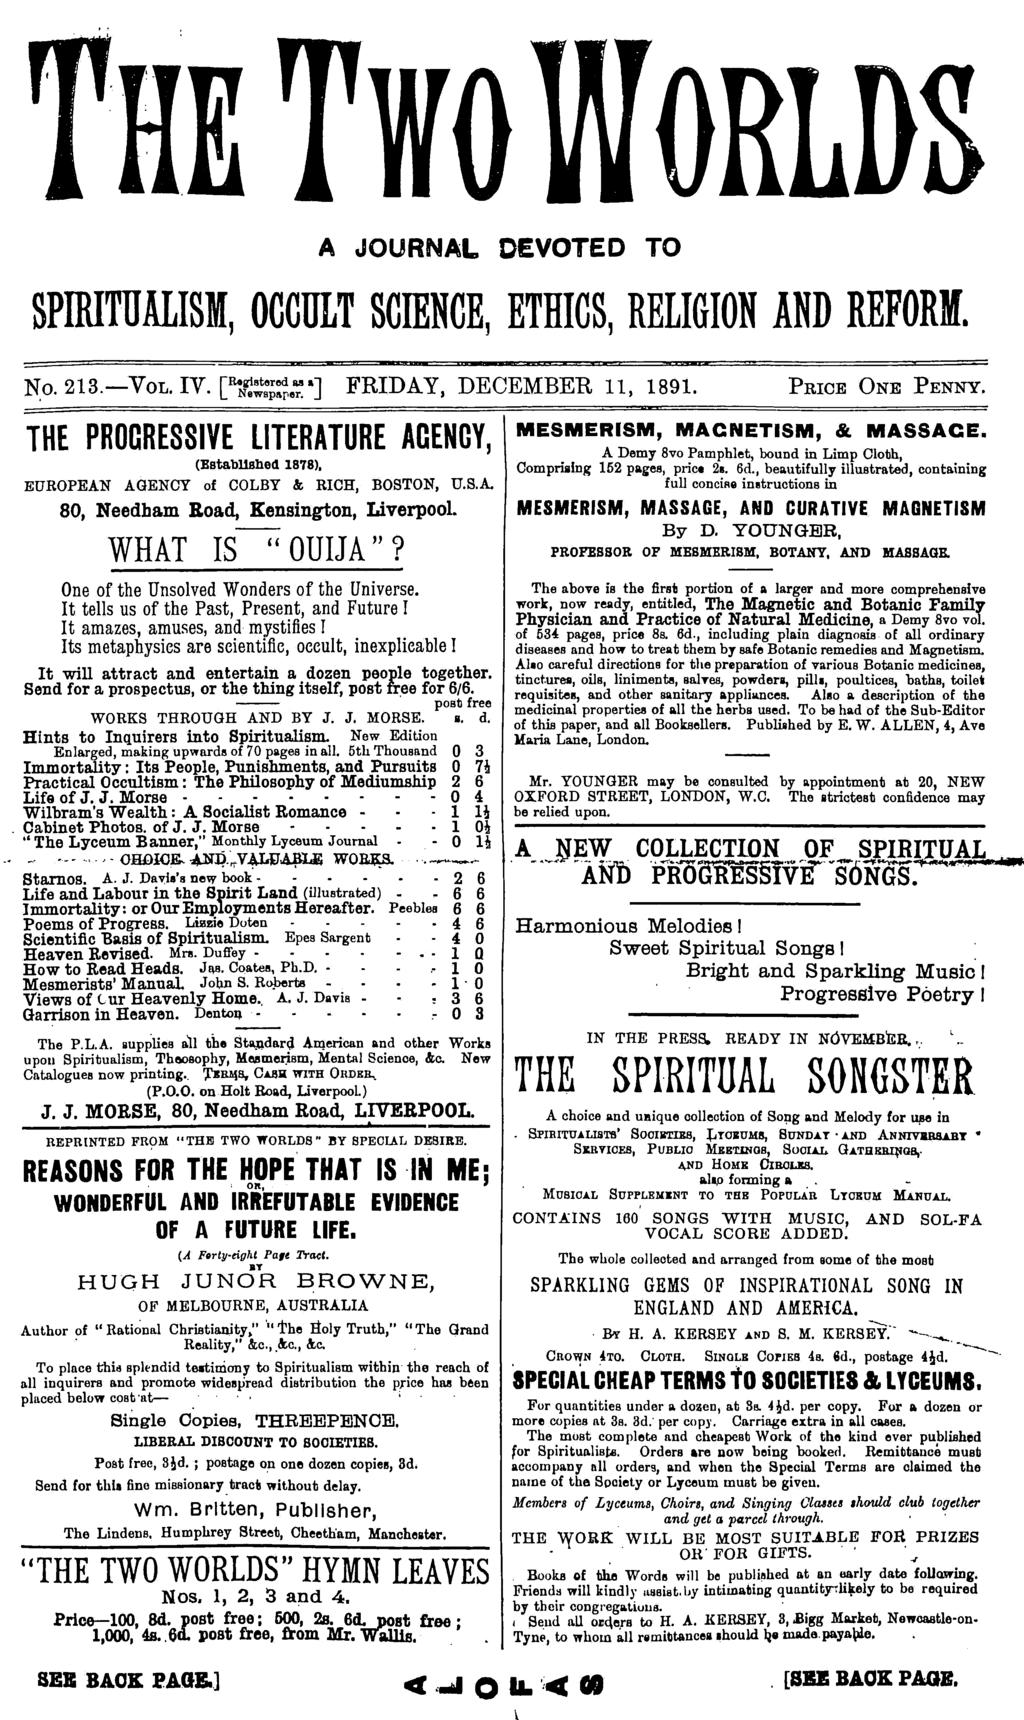 .. A JOURNAL DEVOTED TO SPIRITUALISM, OCCULT SCIENCE, ETHICS, RELIGION AND REFORM. N:O. 213.-VoL. IV. [Refe~:;:;e~a] FRIDAY, DECEMBER 11, 1891. PRICE ONE PENNY.